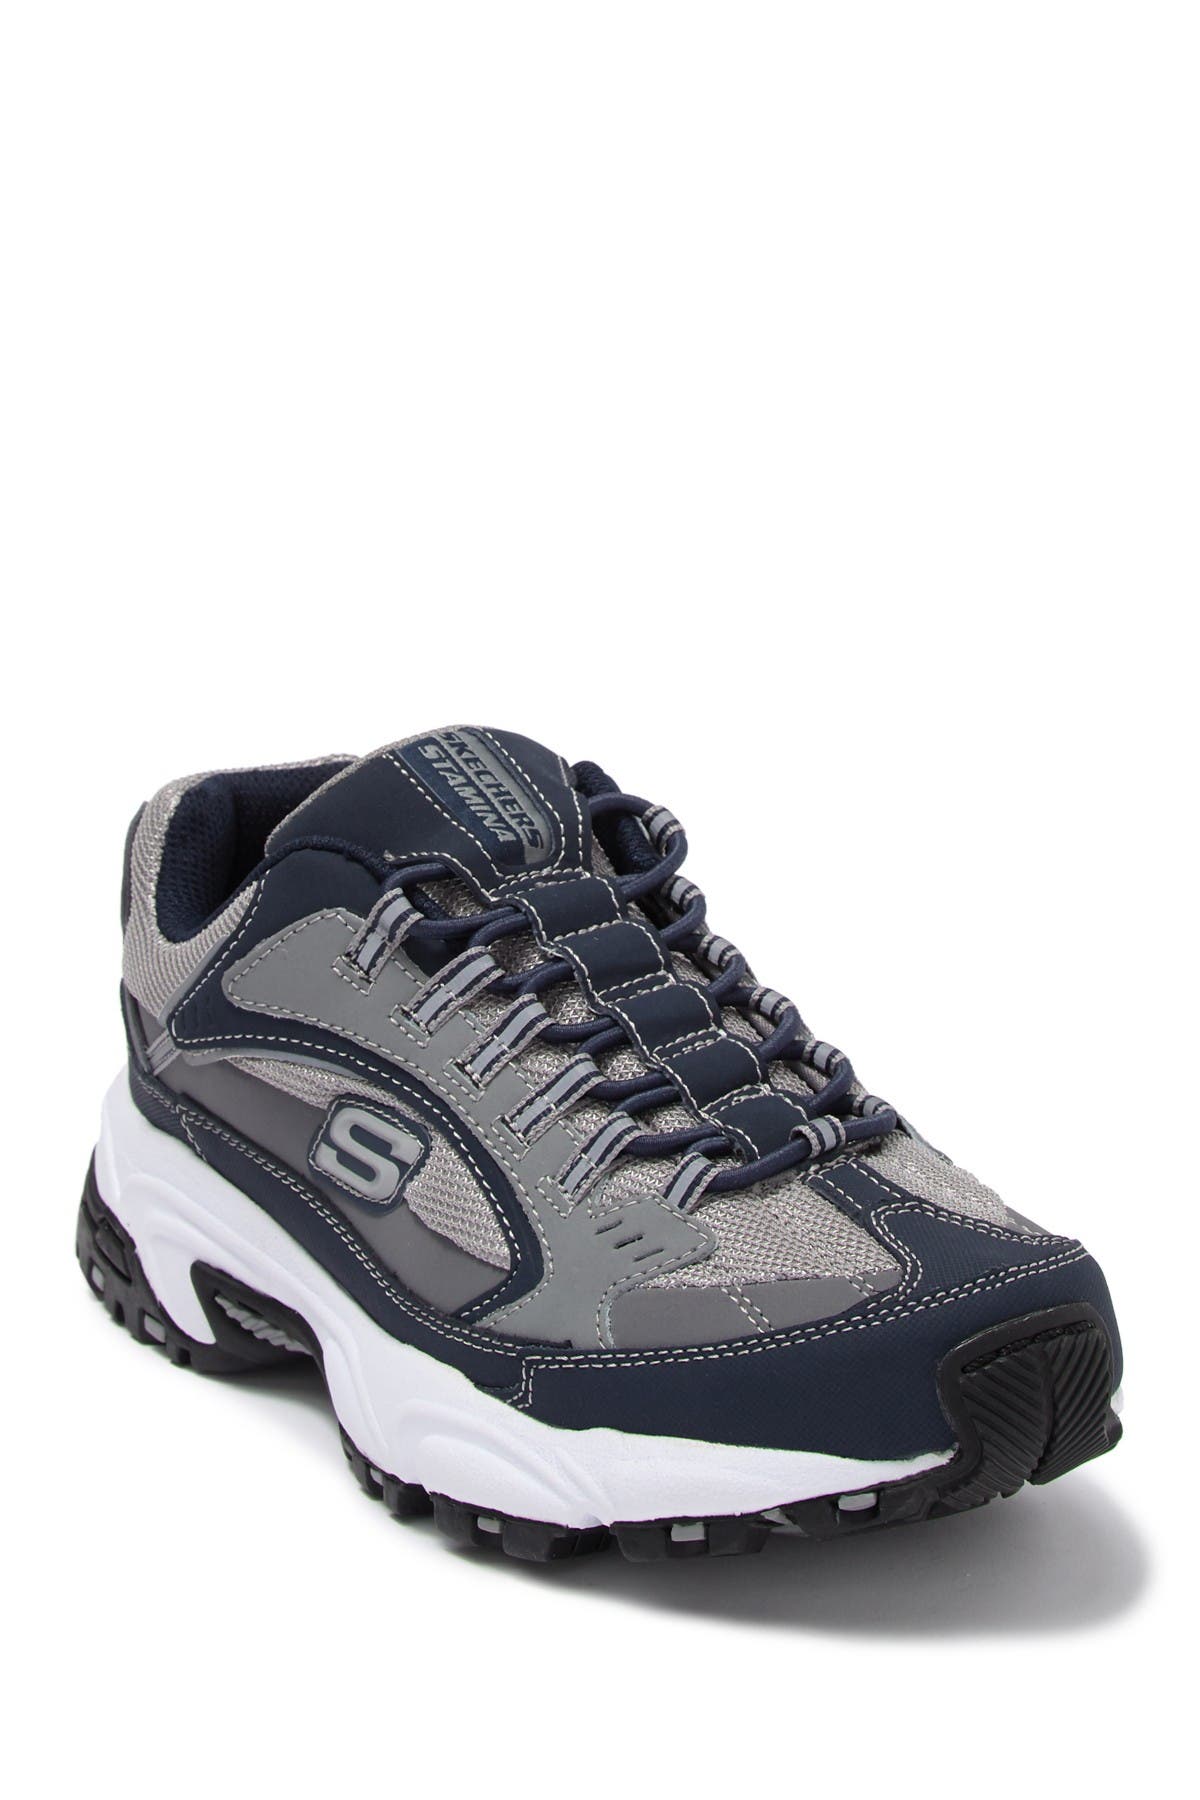 Skechers | Stamina Lace-Up Sneaker 